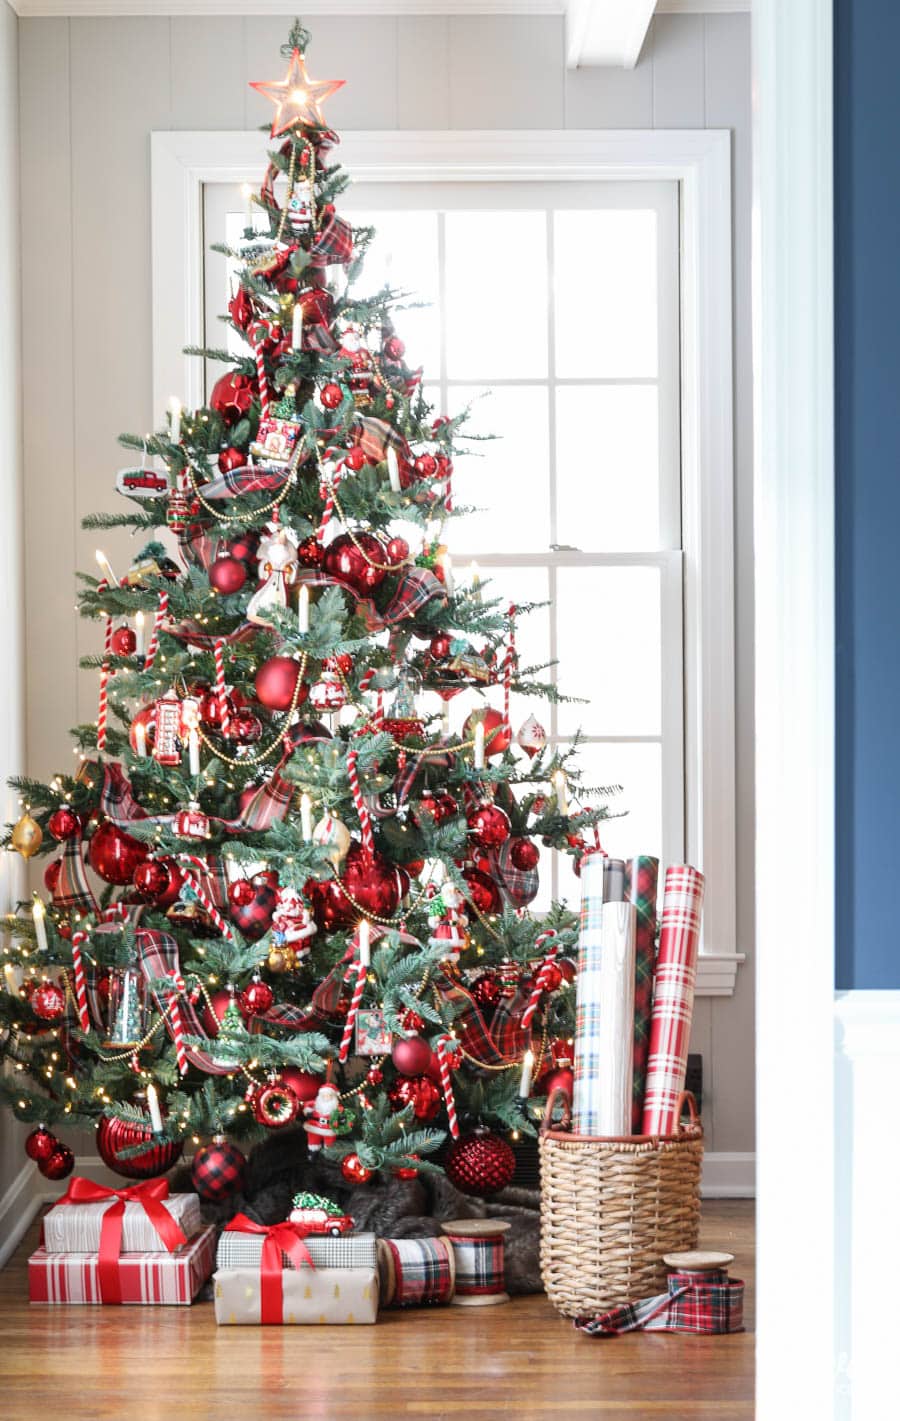 nostalgic Christmas tree themes using candy canes, Santa ornaments, and other classic elements